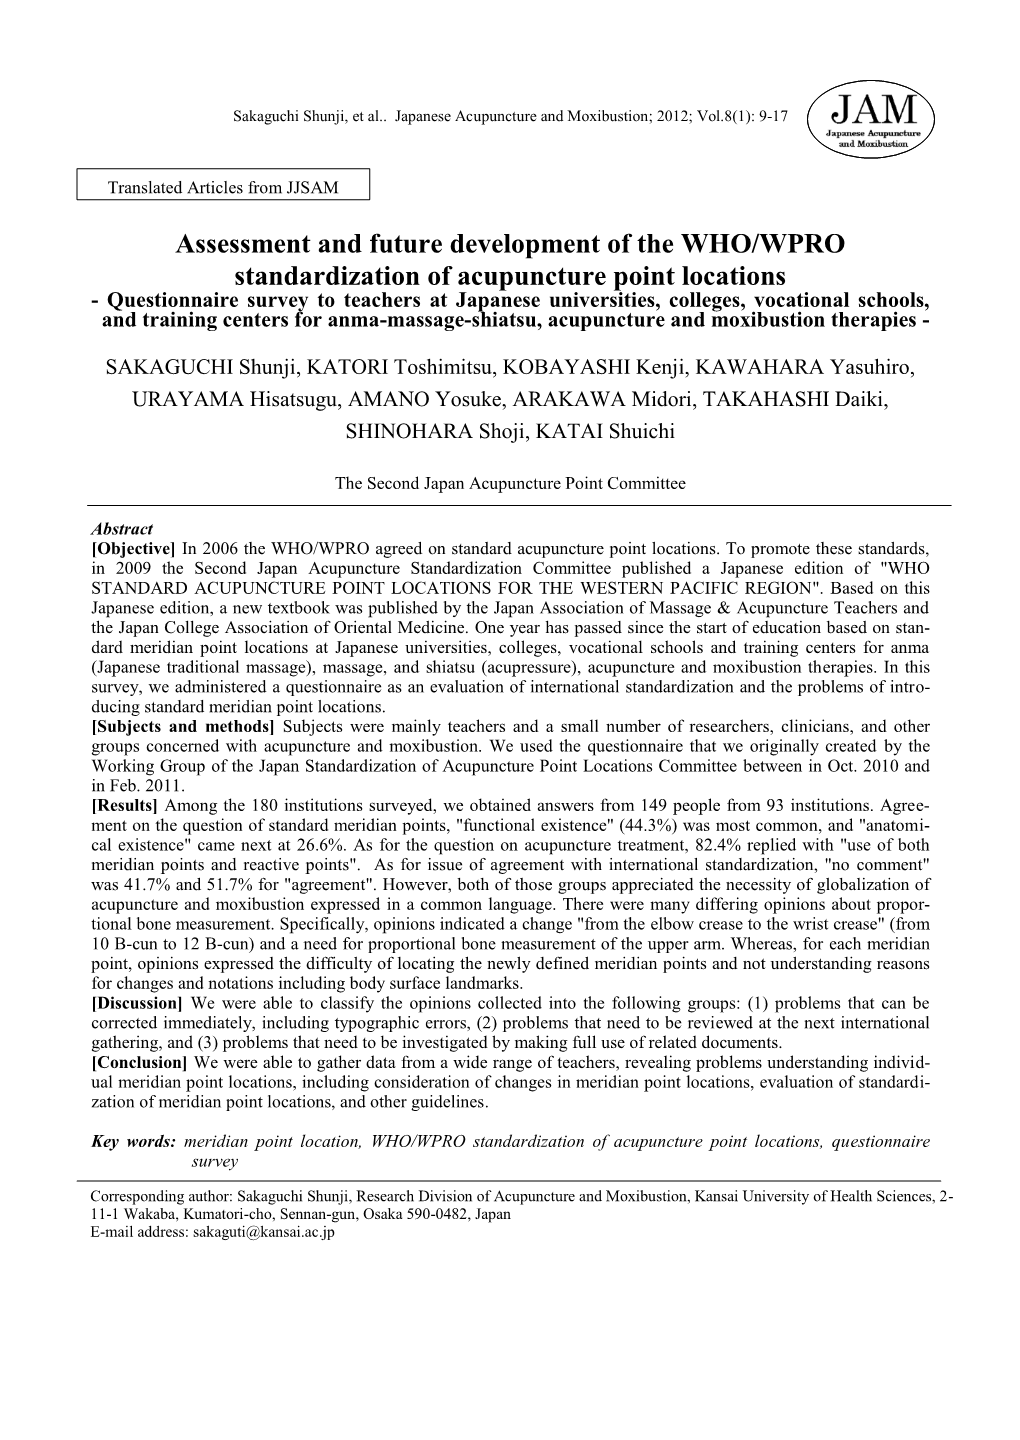 Assessment and Future Development of the WHO/WPRO Standardization